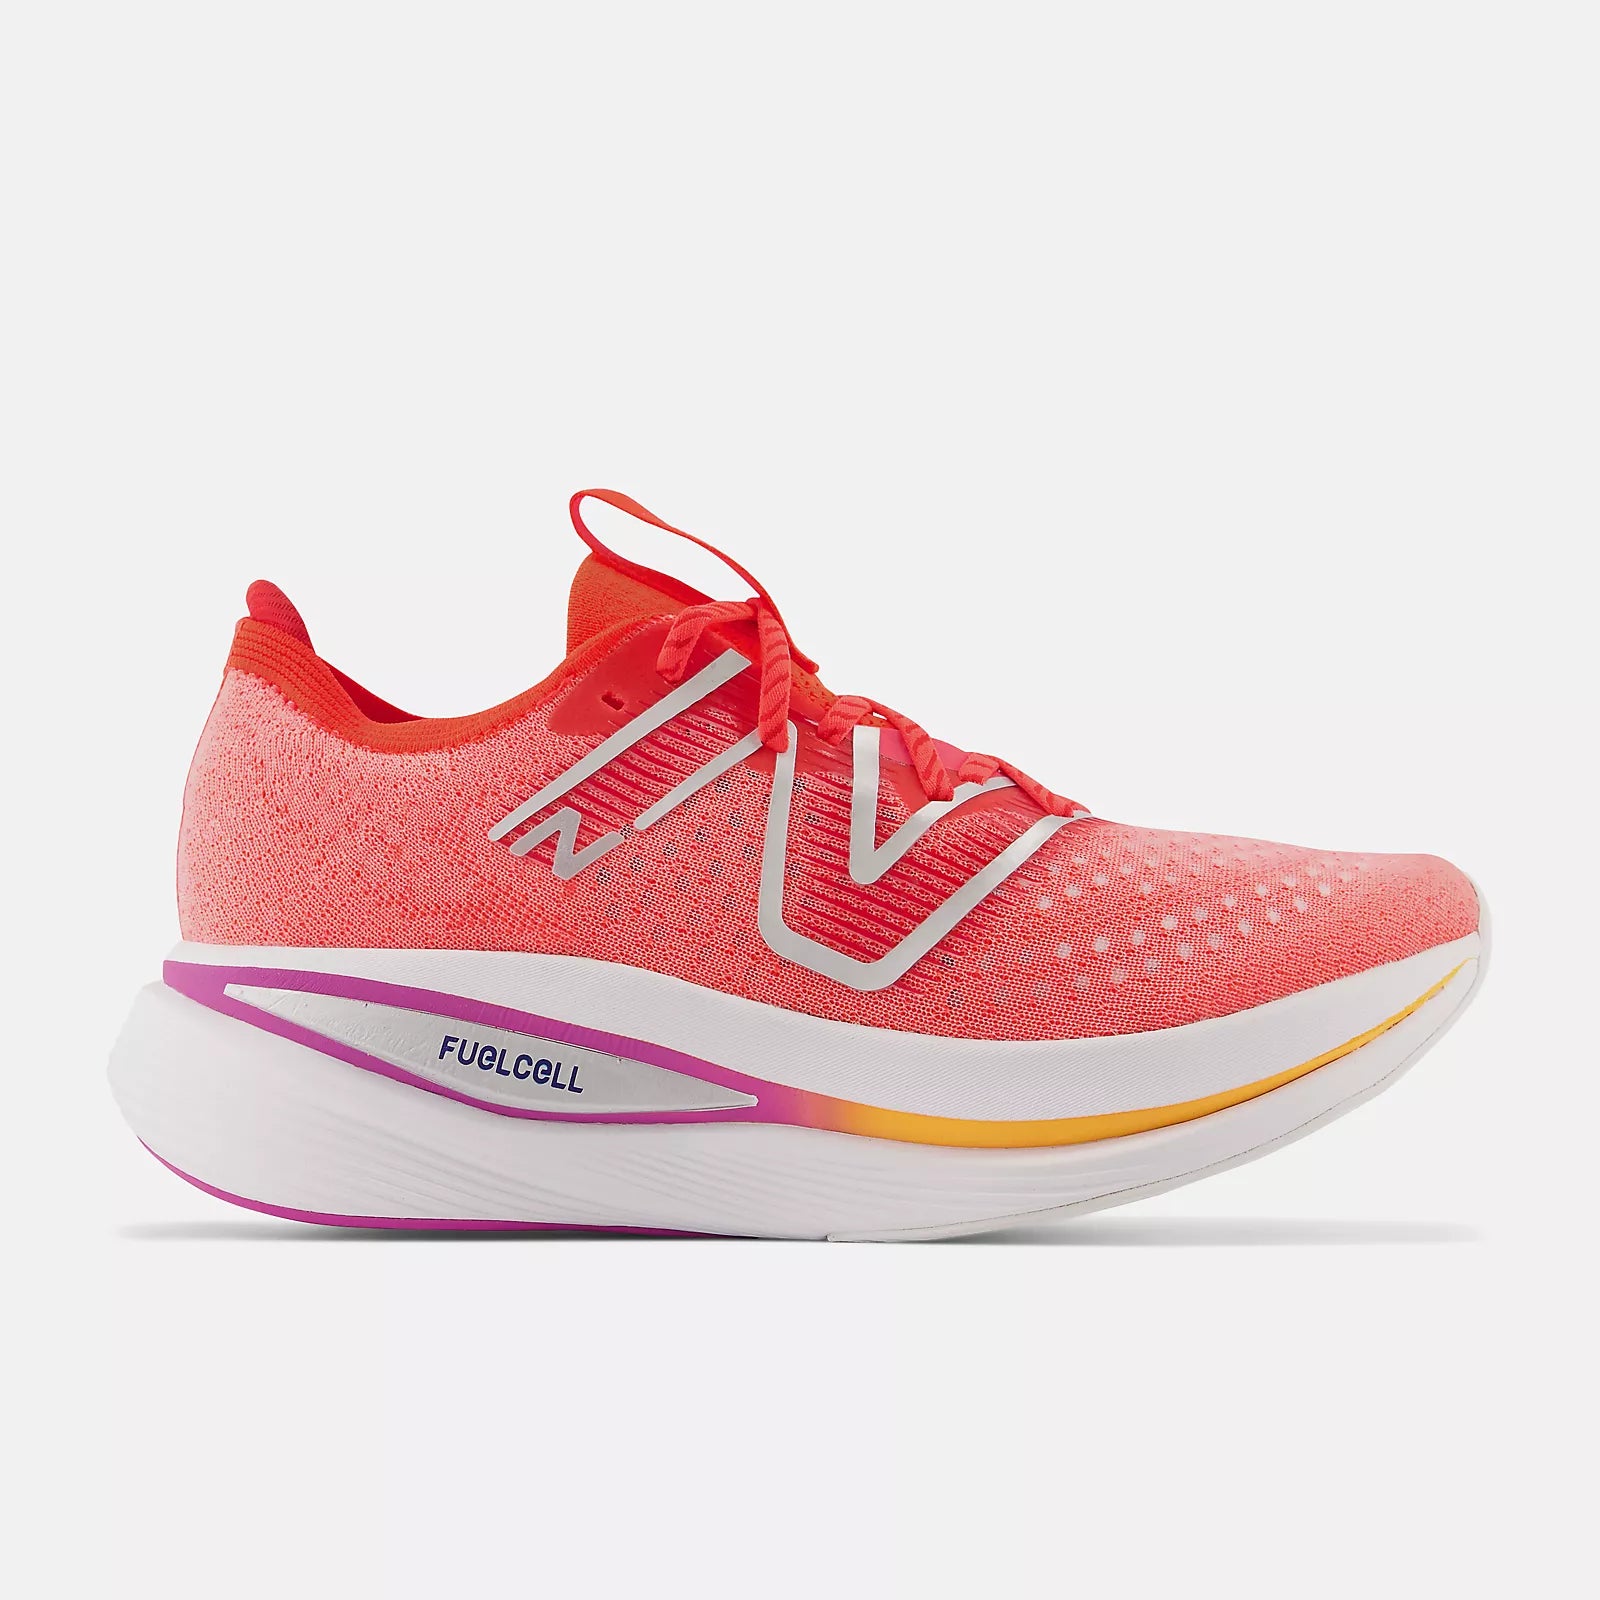 Lateral view of the Men's Fuel Cell SuperComp Trainer by New Balance in the color Electric Red/Metallic Silver